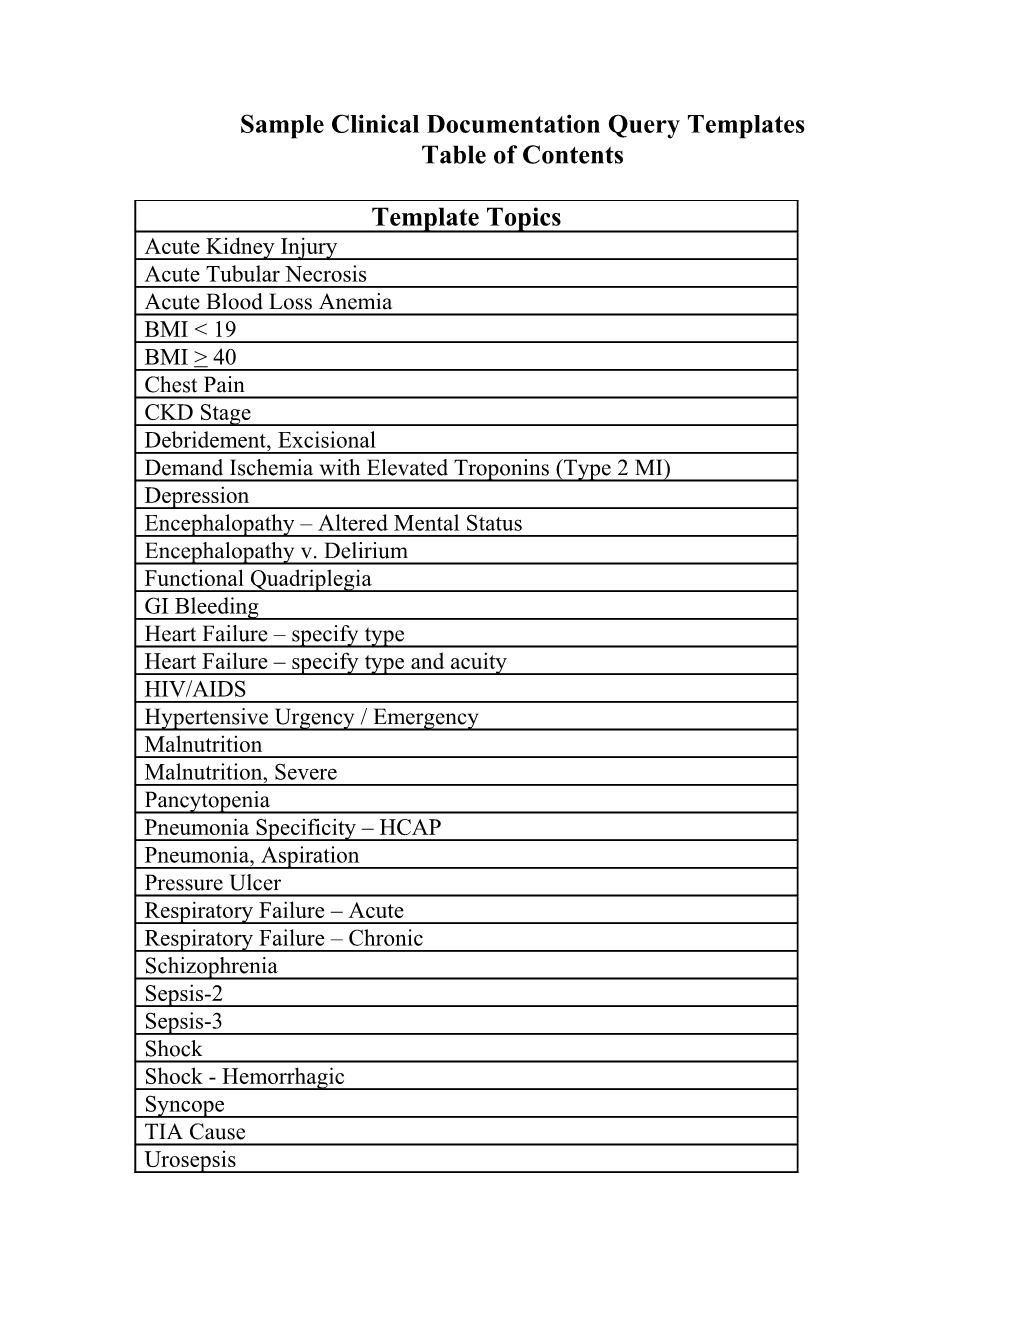 Sample Clinical Documentation Query Templates